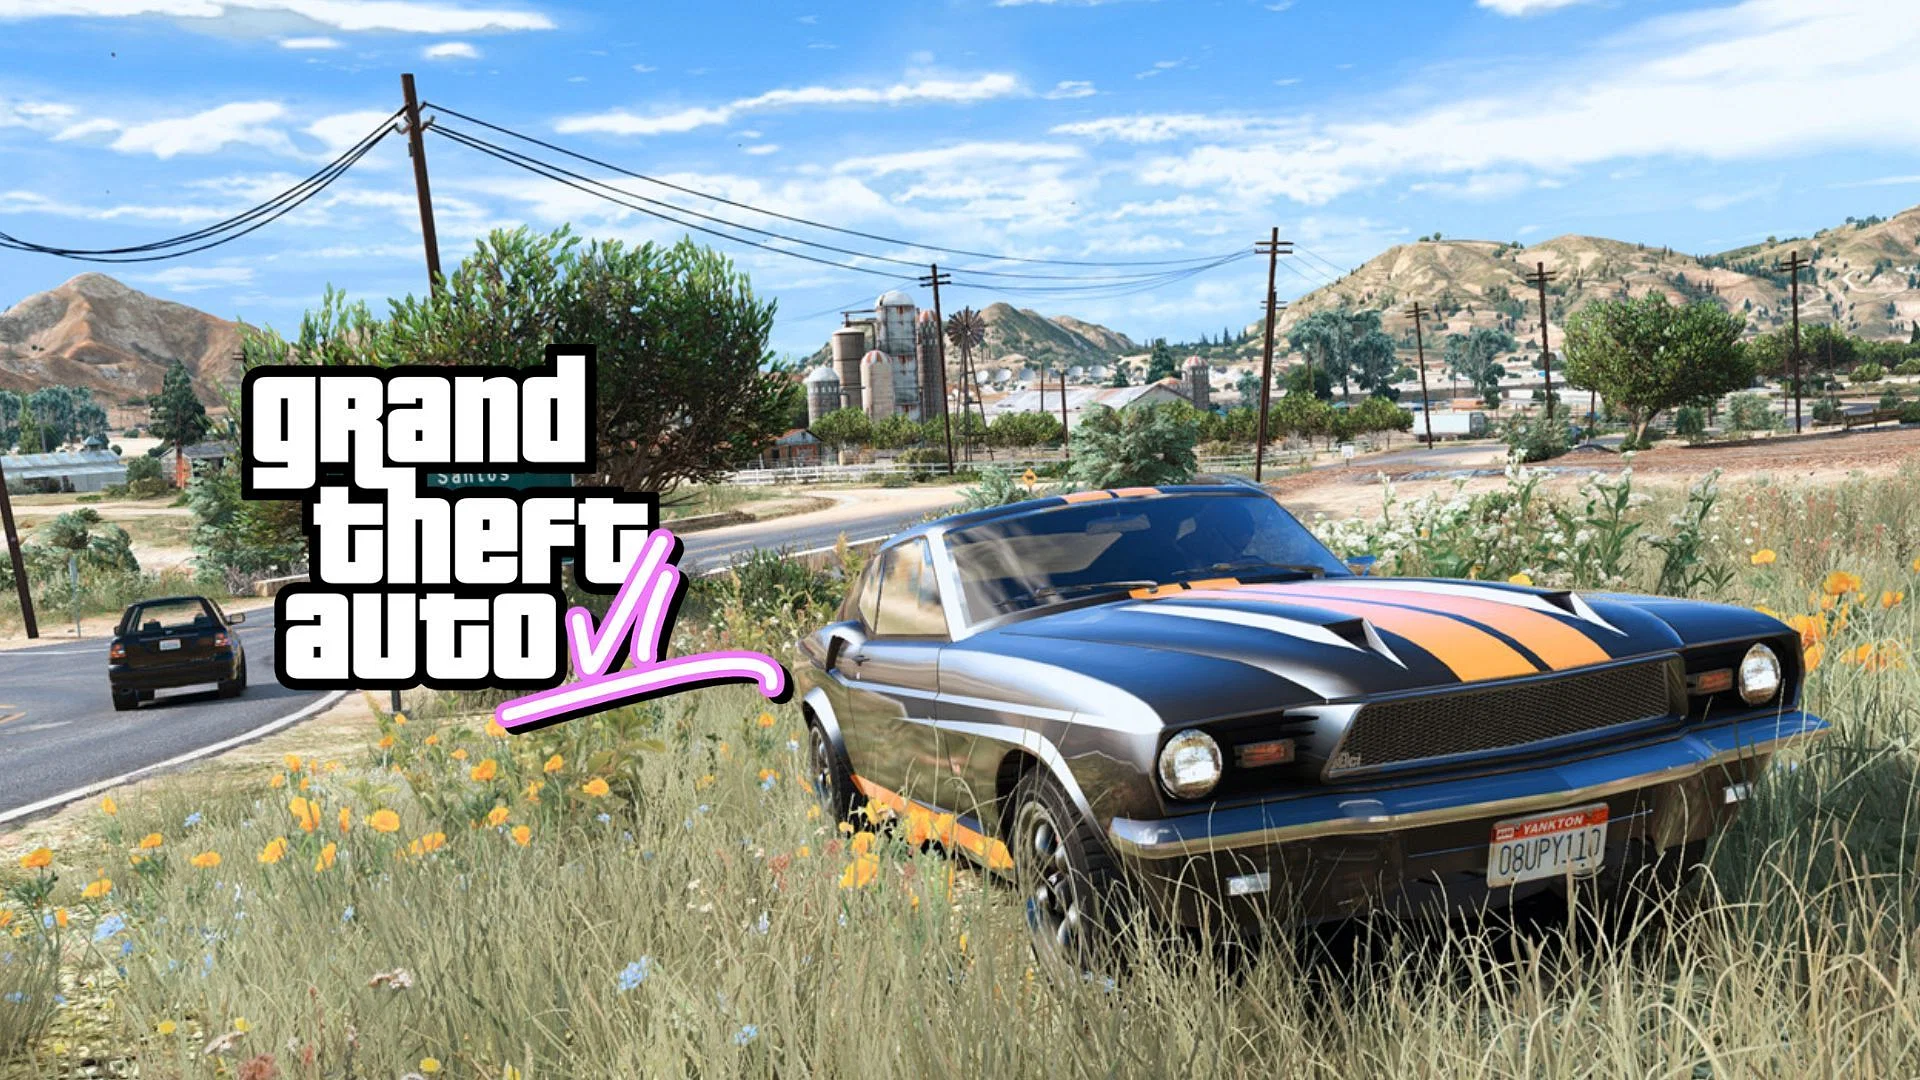 Exciting Update Rockstar Teases New Grand Theft Auto 6 Trailer – Fans Eager for Sneak Peek-